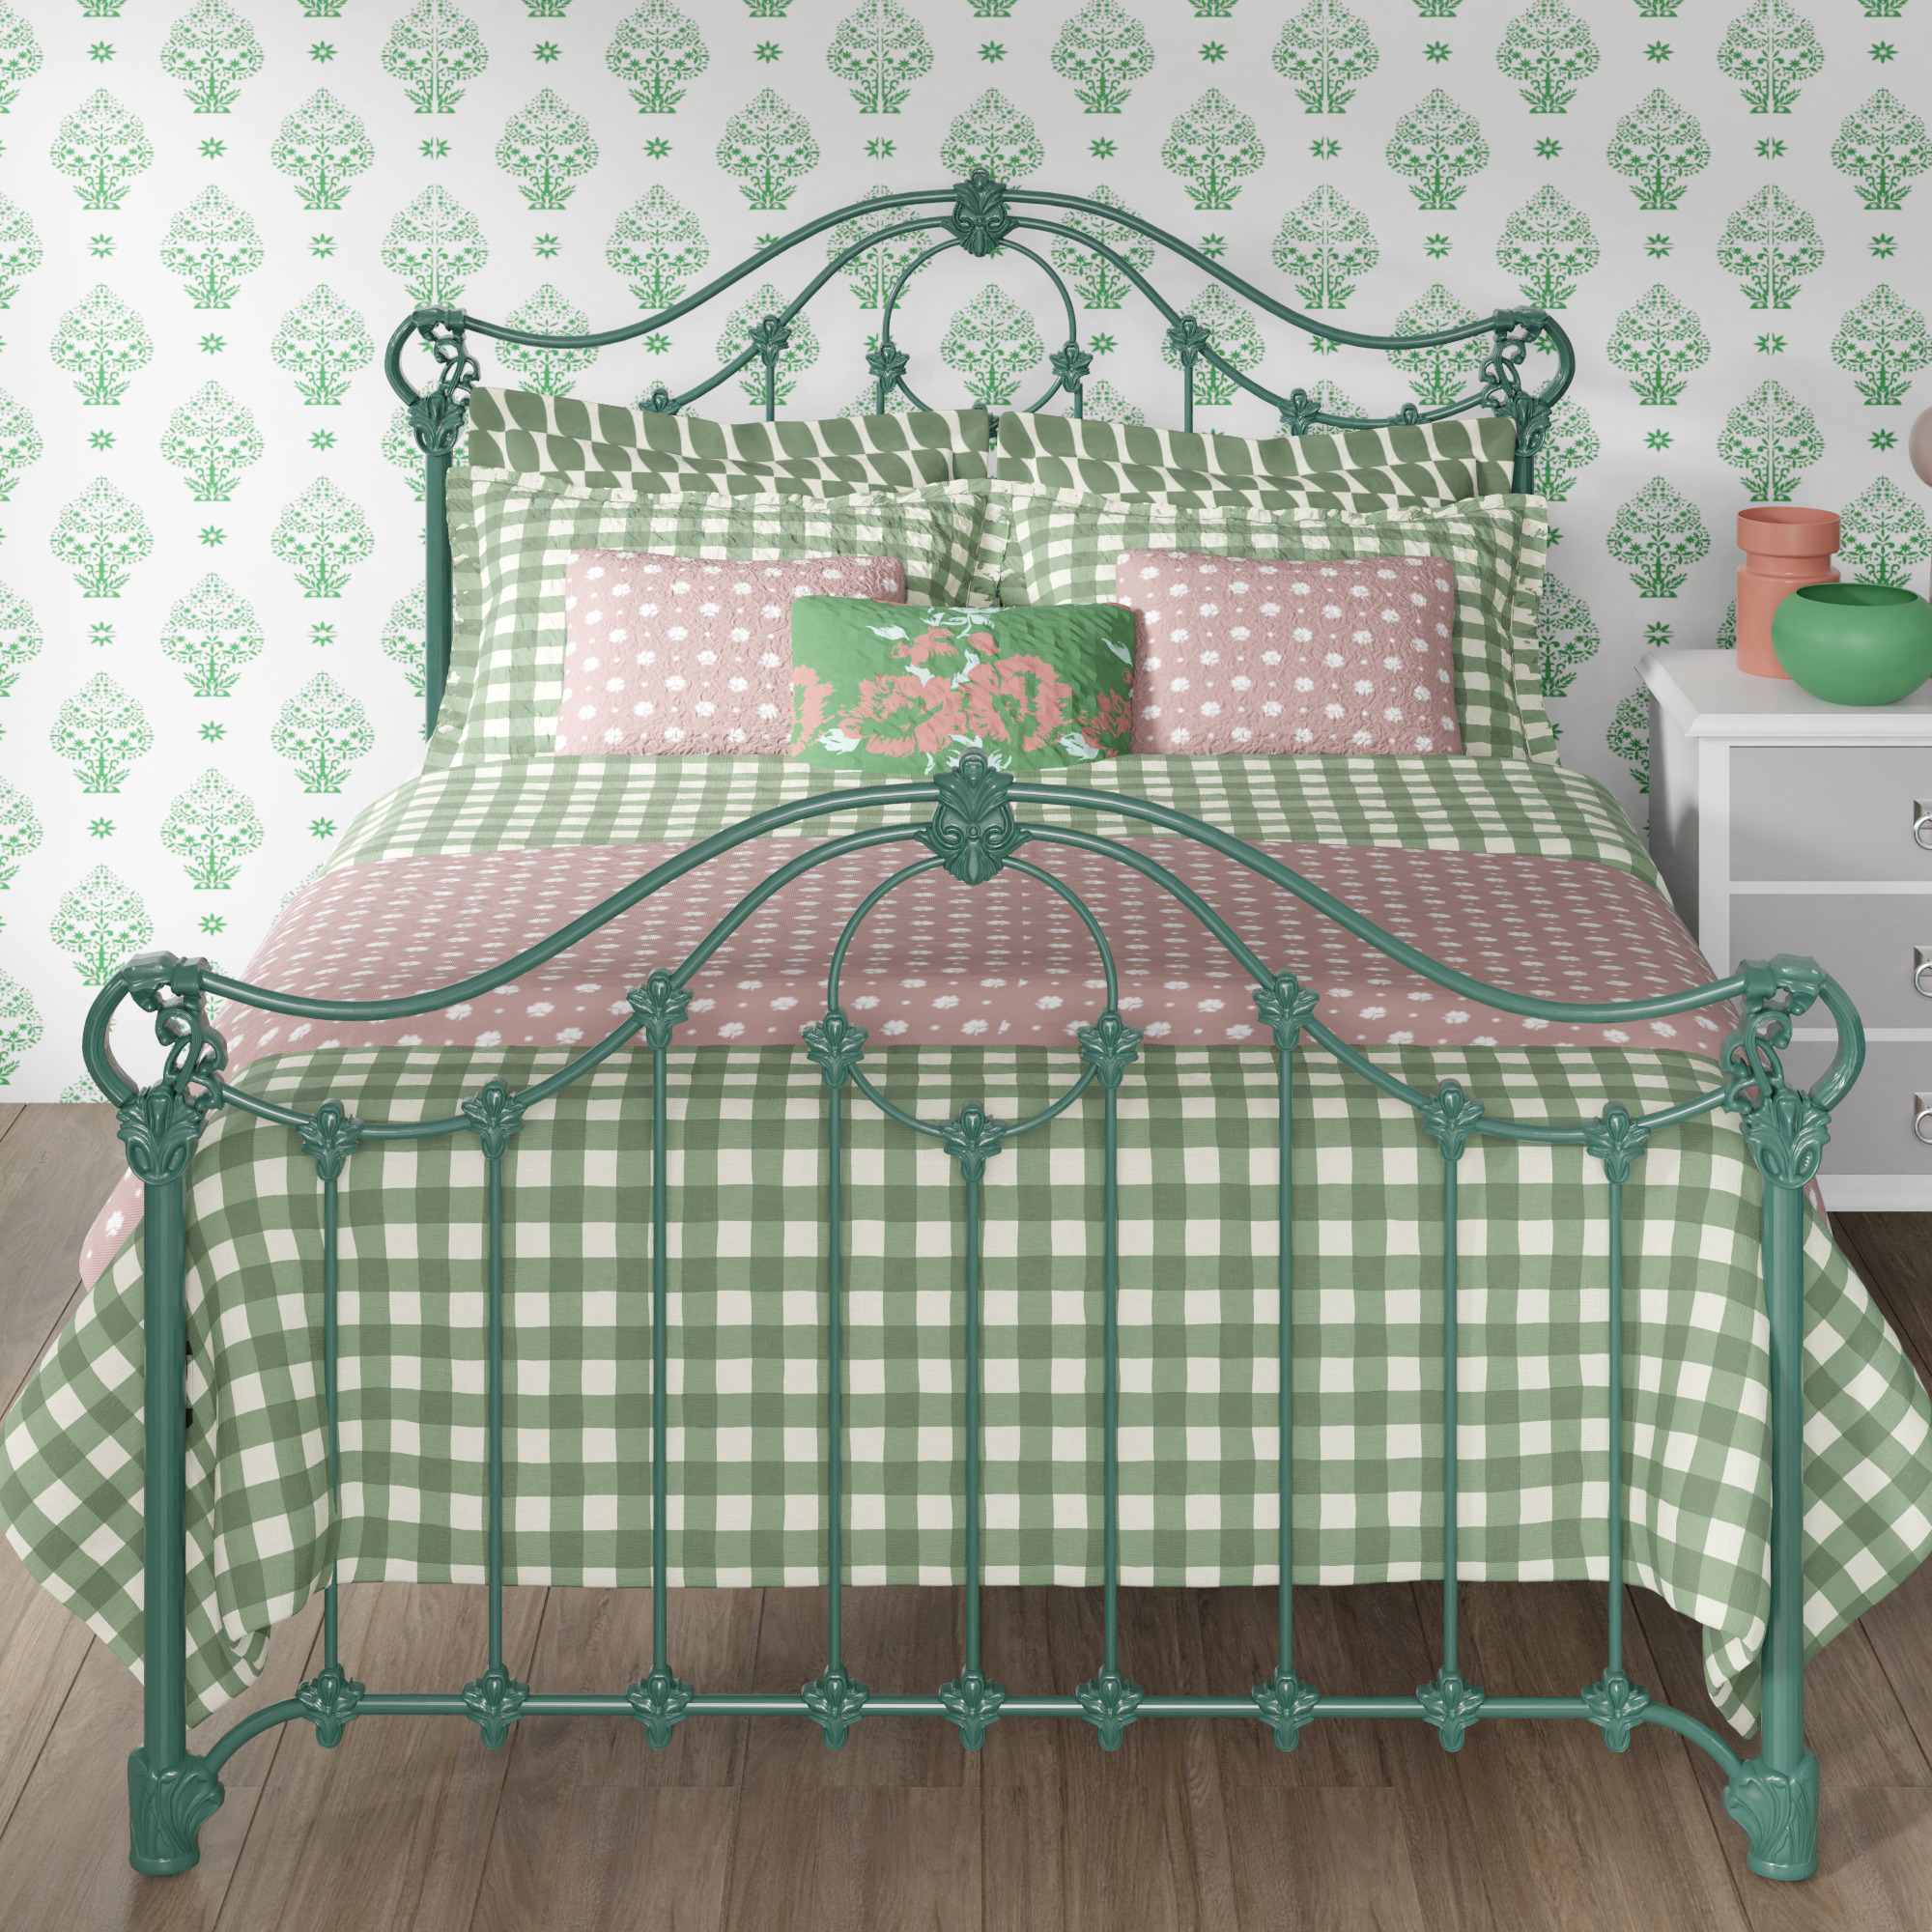 Alva iron bed frame - Image green and white bedroom